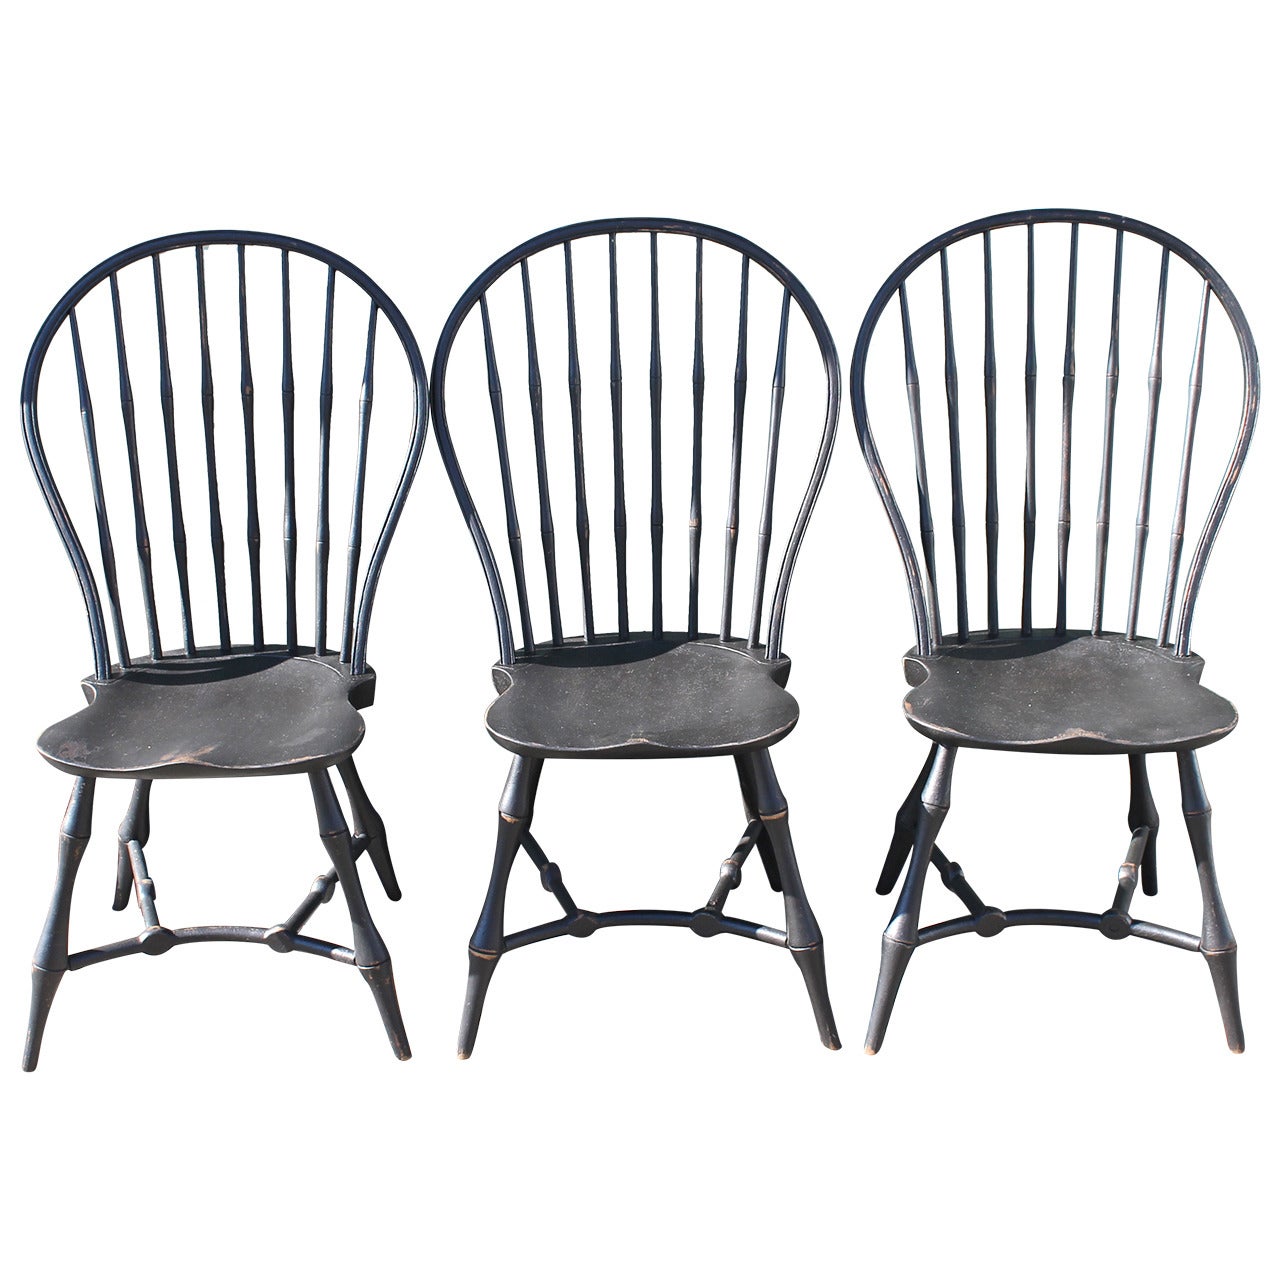 Set of Three 19th Century Black Painted New England Windsor Chairs